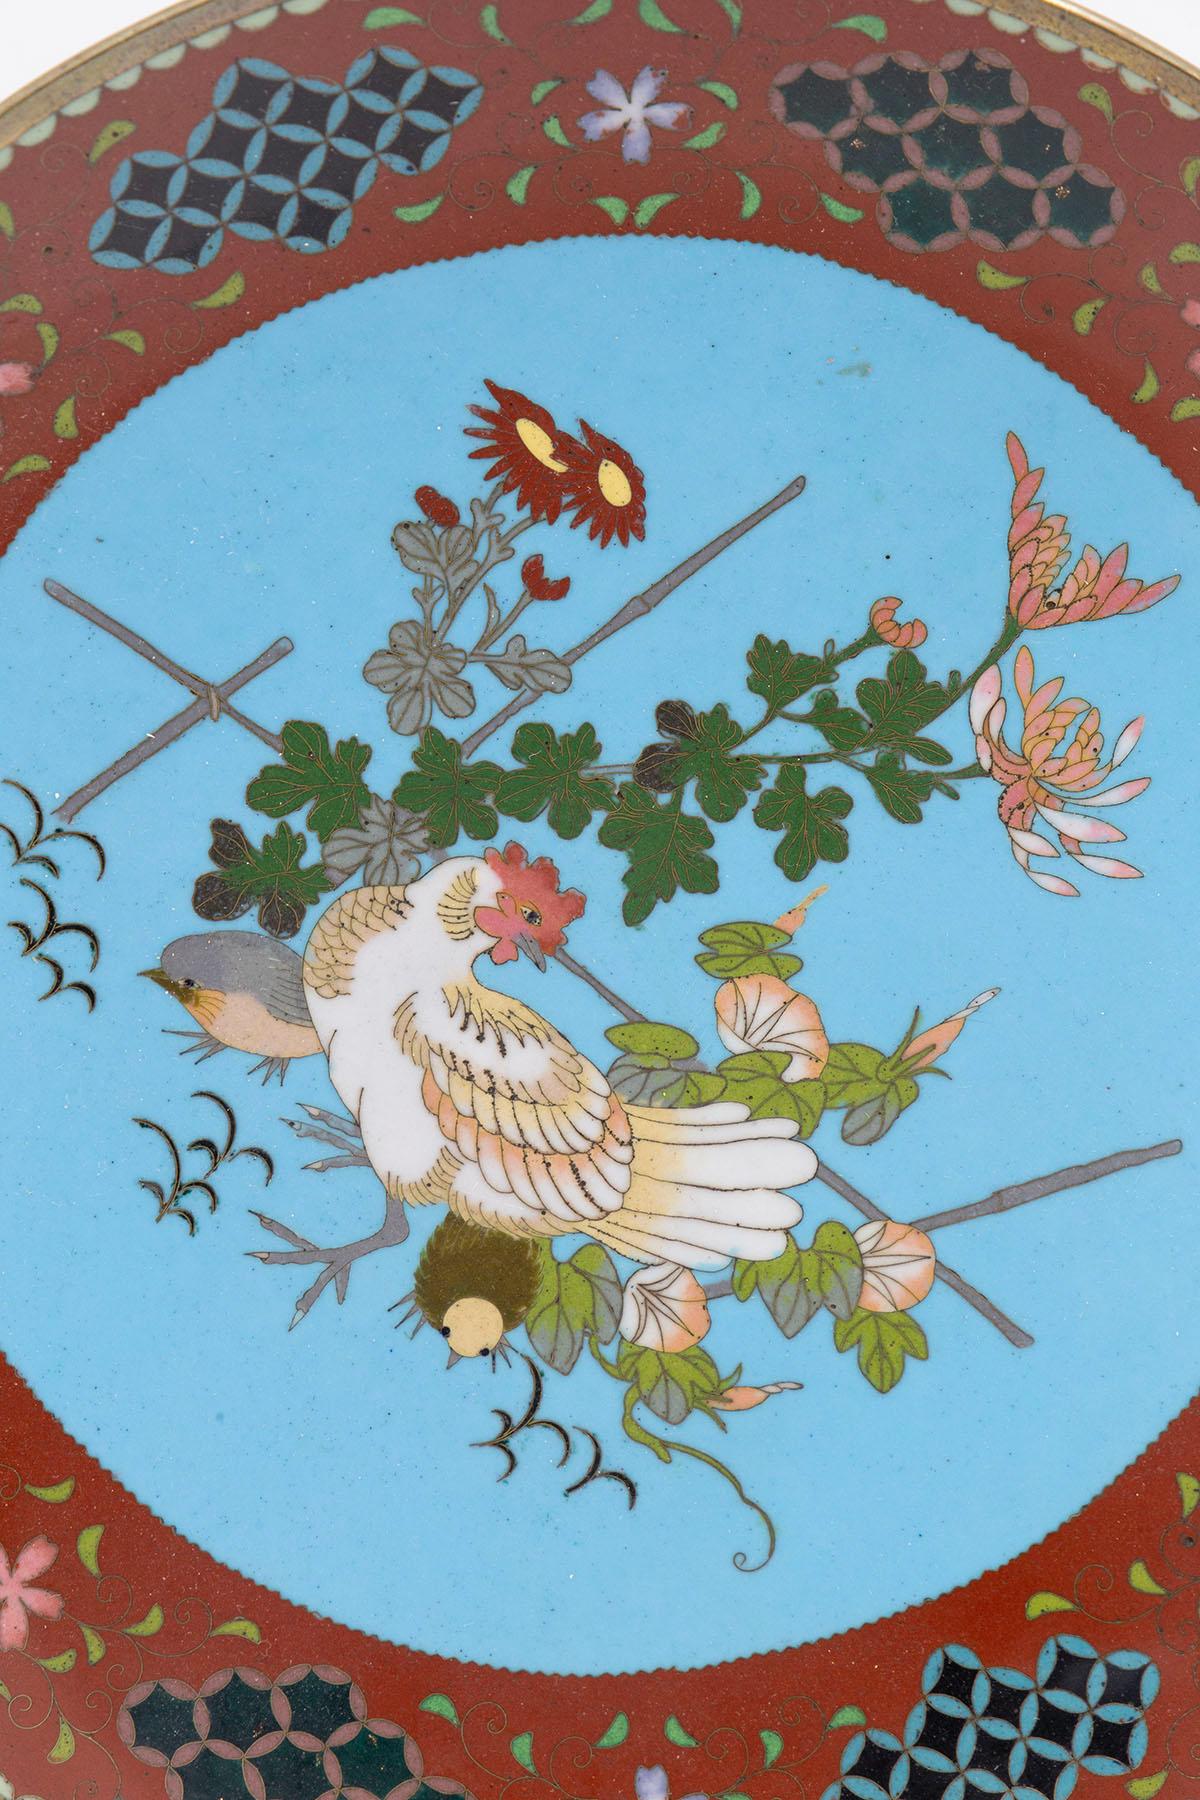 Round plate made of bronze and cloisonné enamel designed in China in the 20th century.
This plate is made of bronze and cloisonné enamel, a goldsmith technique originally applied to jewellery design. The polychrome decorations depict a white